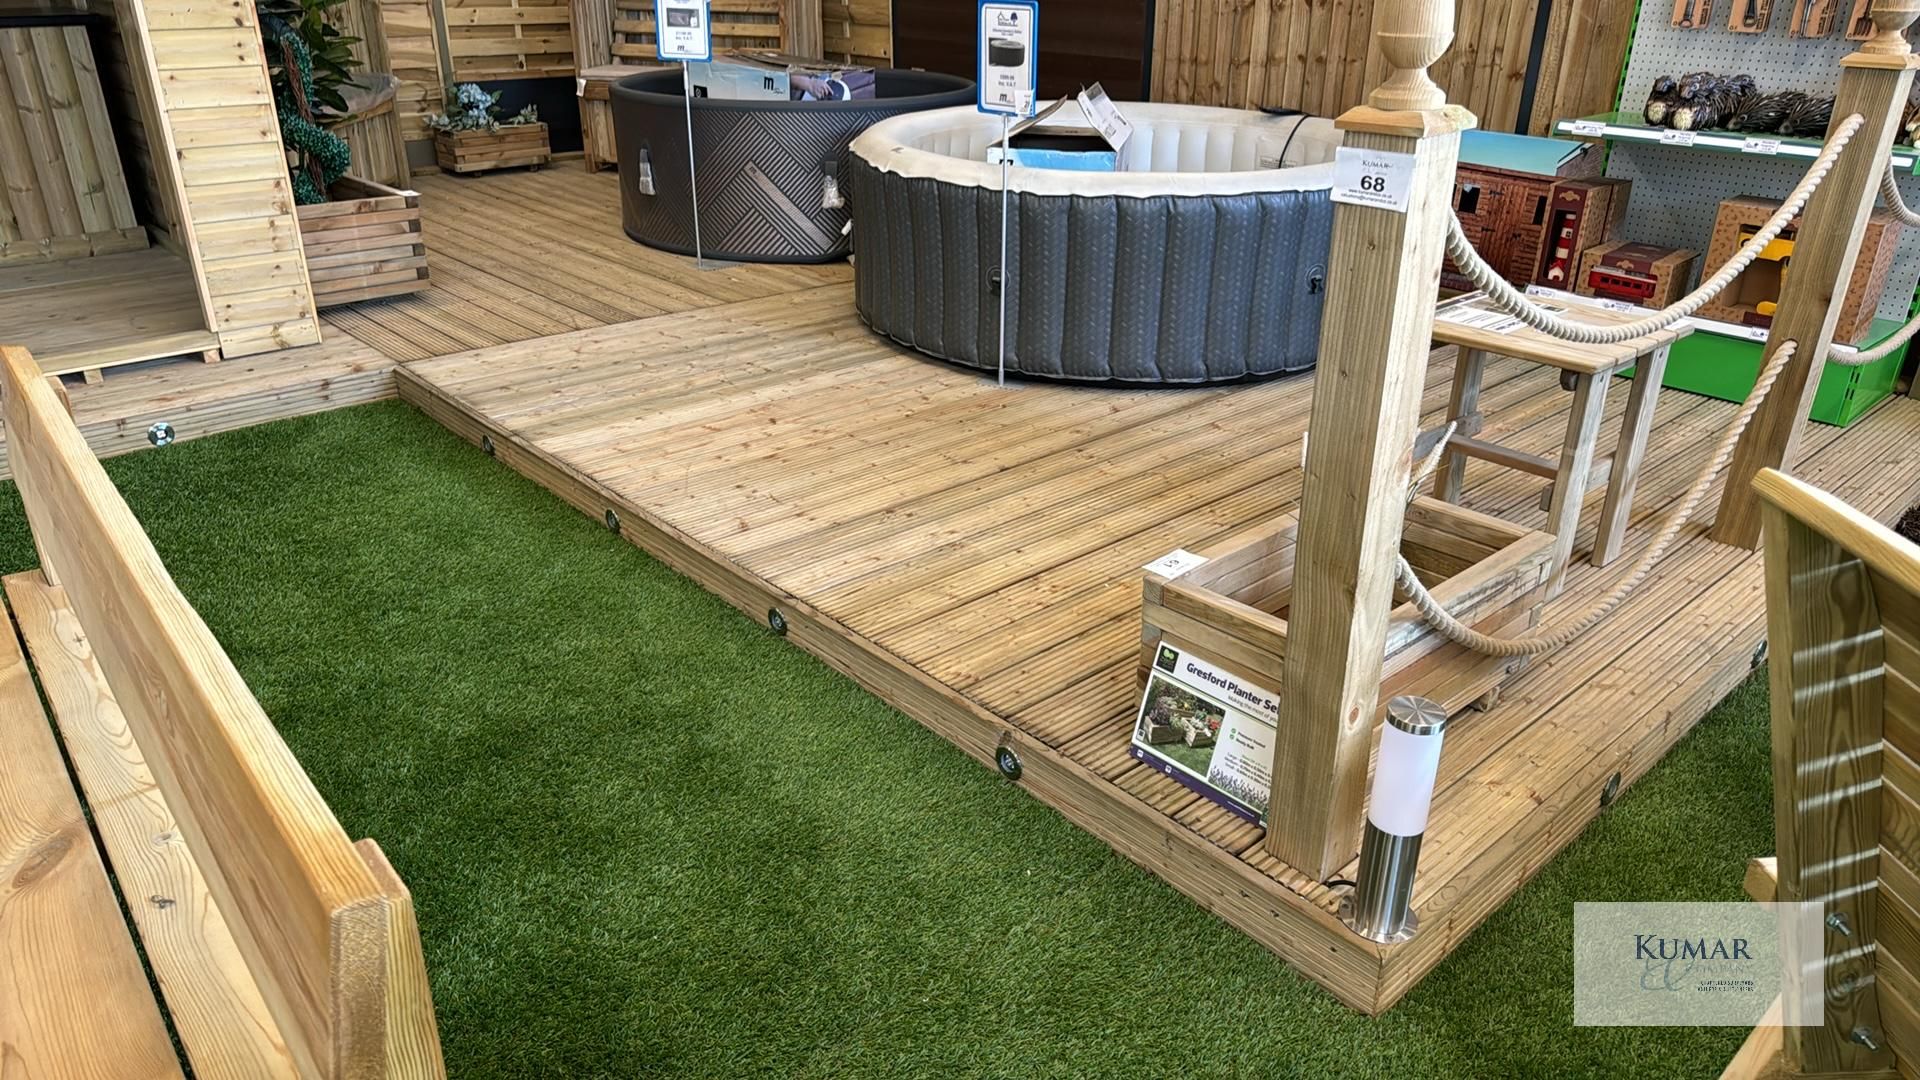 3 Large Wooden Decking Area's - Approximately 4m x 4m Each - Advised Assembled in Three Sections - - Image 3 of 10